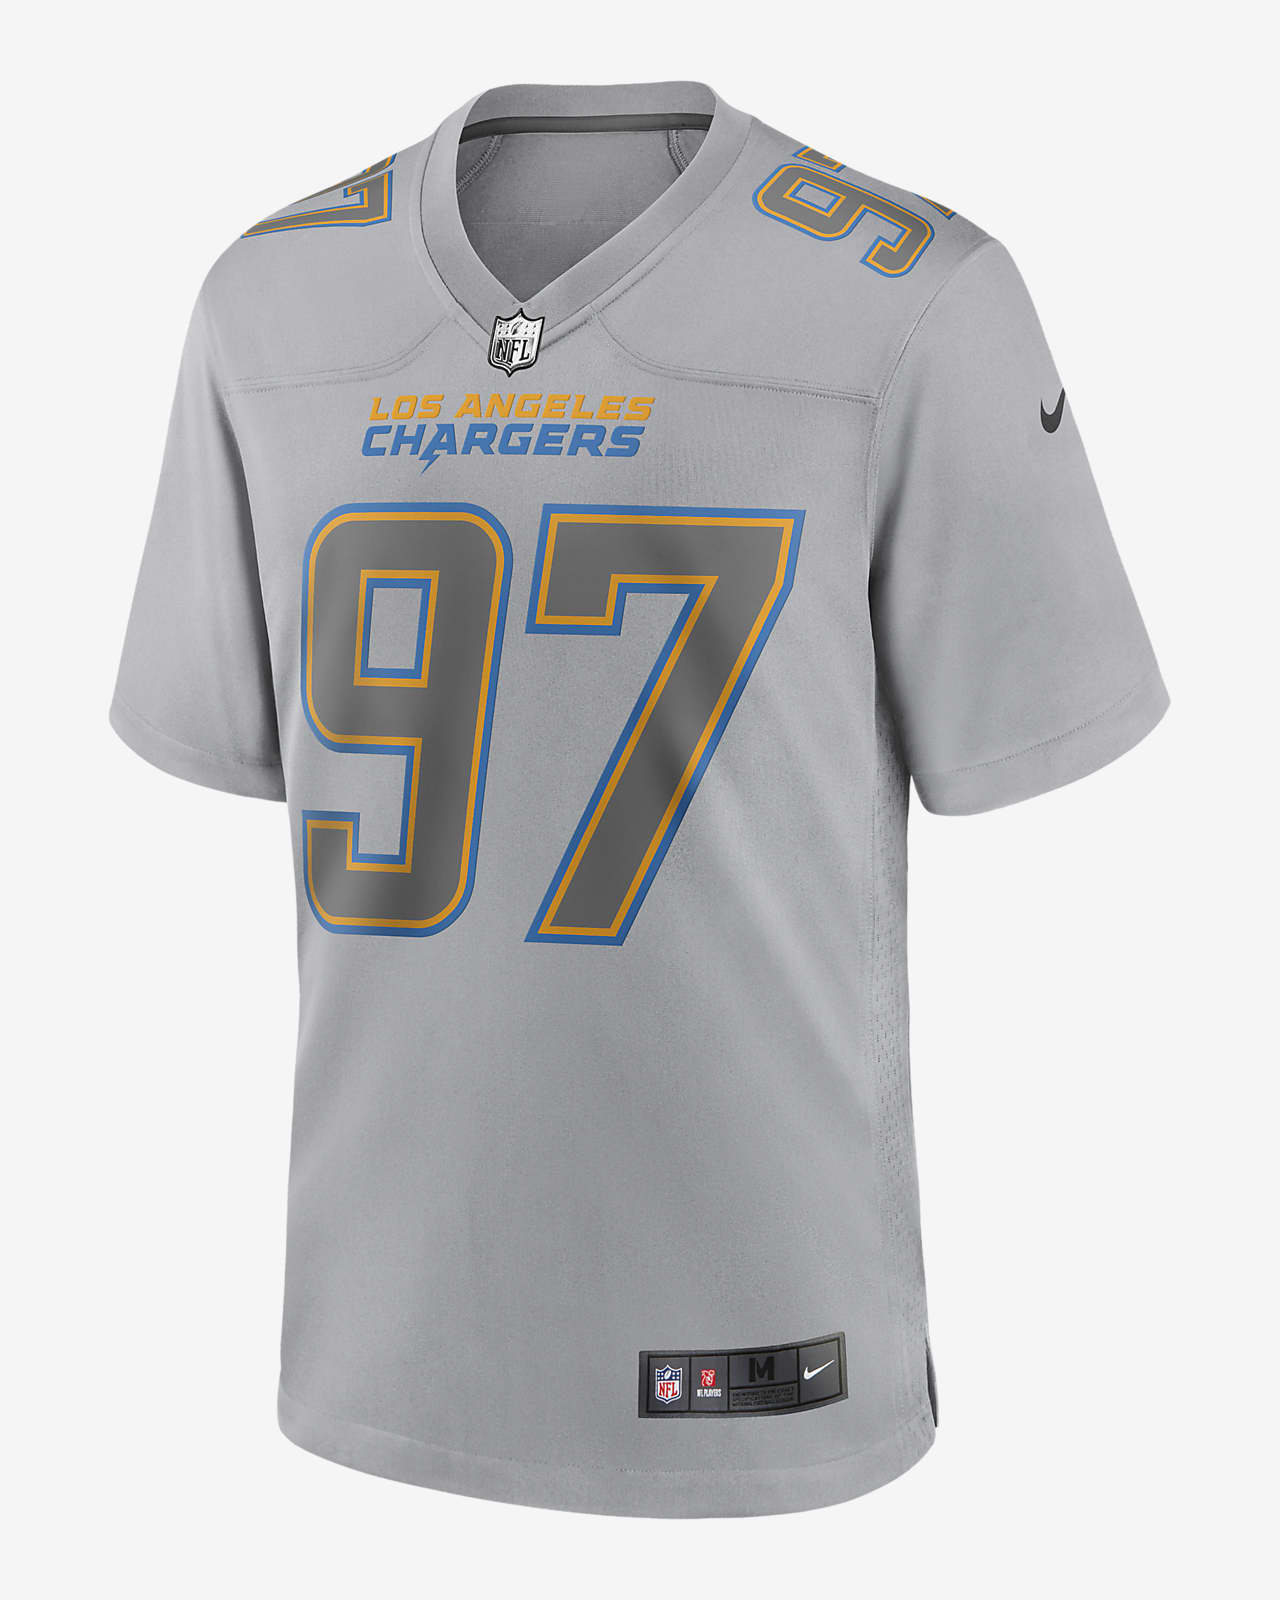 Girls Los Angeles Chargers NFL Jerseys for sale